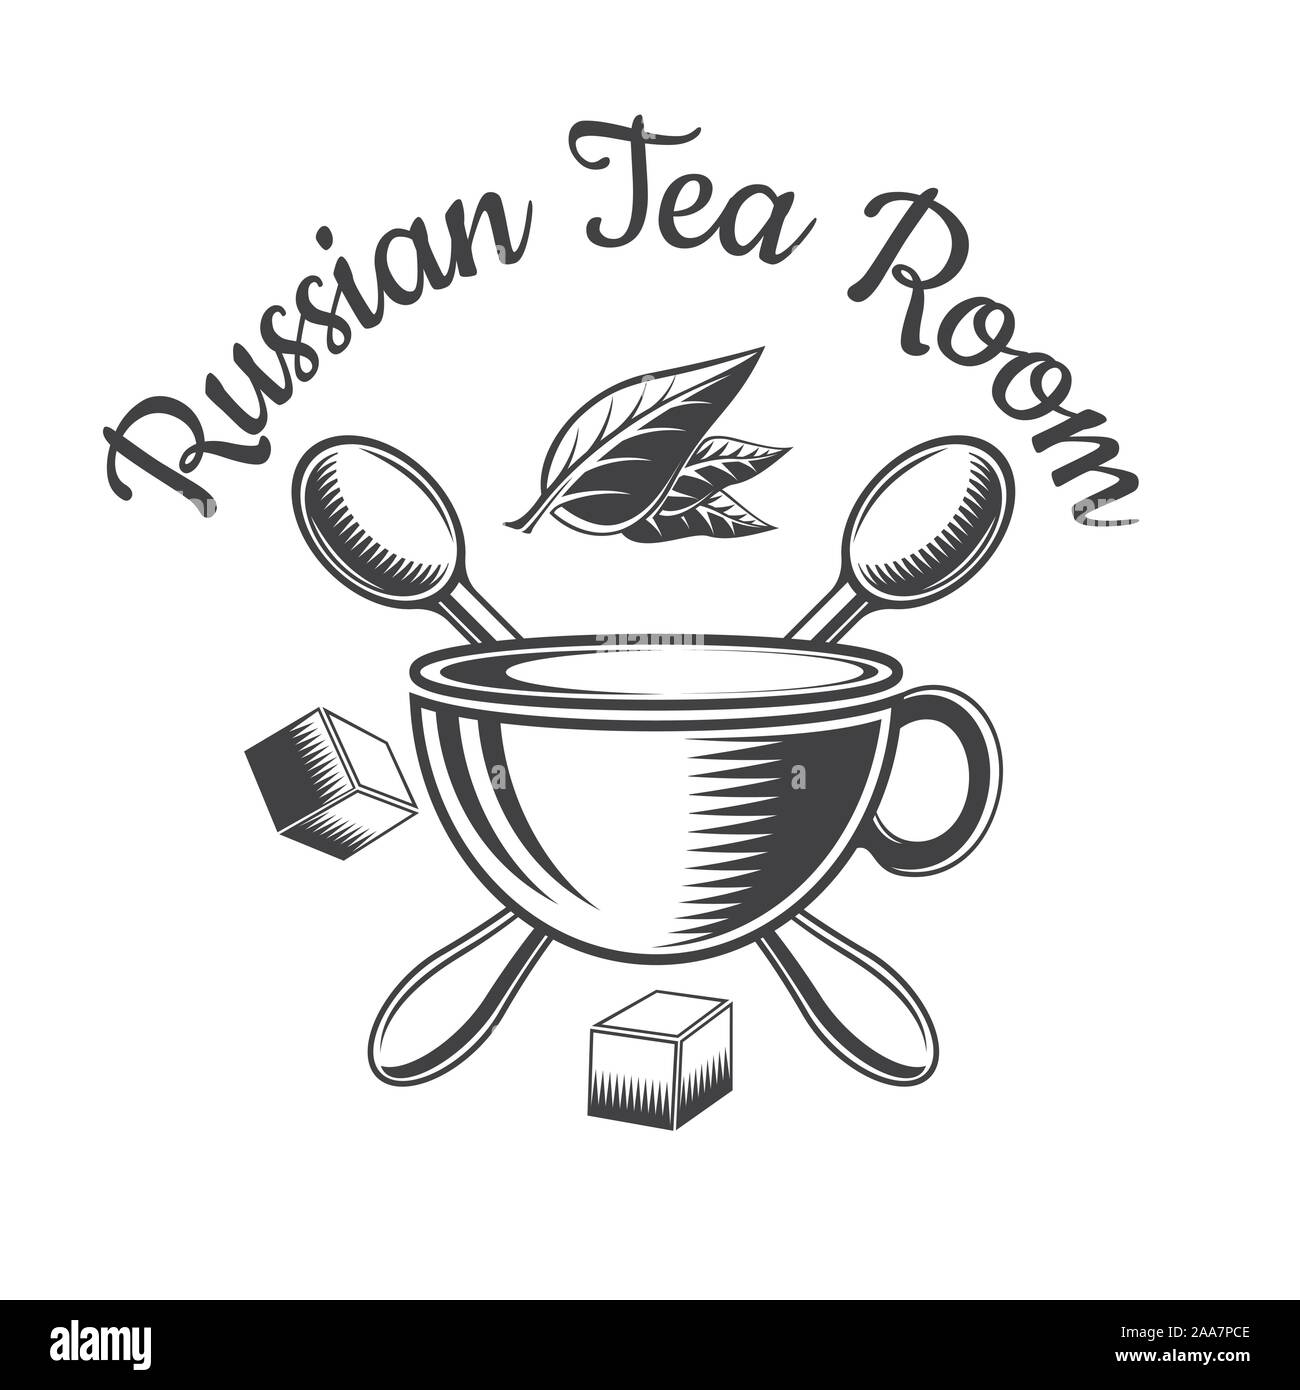 Cup with tea leaves and cross spoons. Logo for cafe, teahouse, Russian teahouse or business Stock Vector